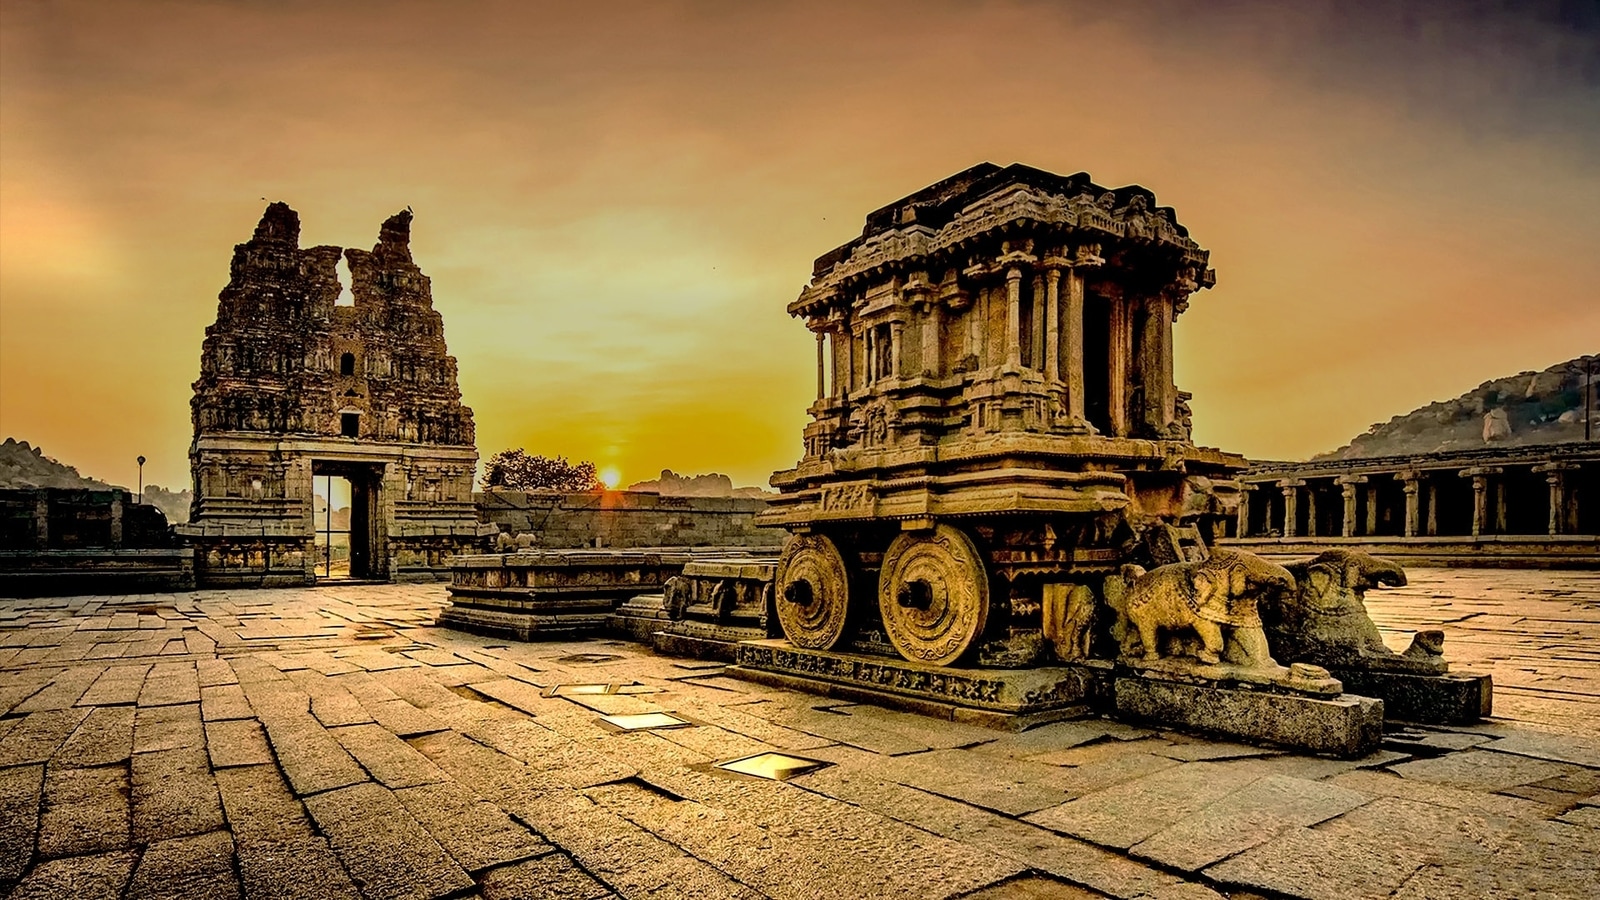 hampi-to-siliguri-india-to-put-spotlight-on-heritage-and-scenic-sites-during-g20-meetings